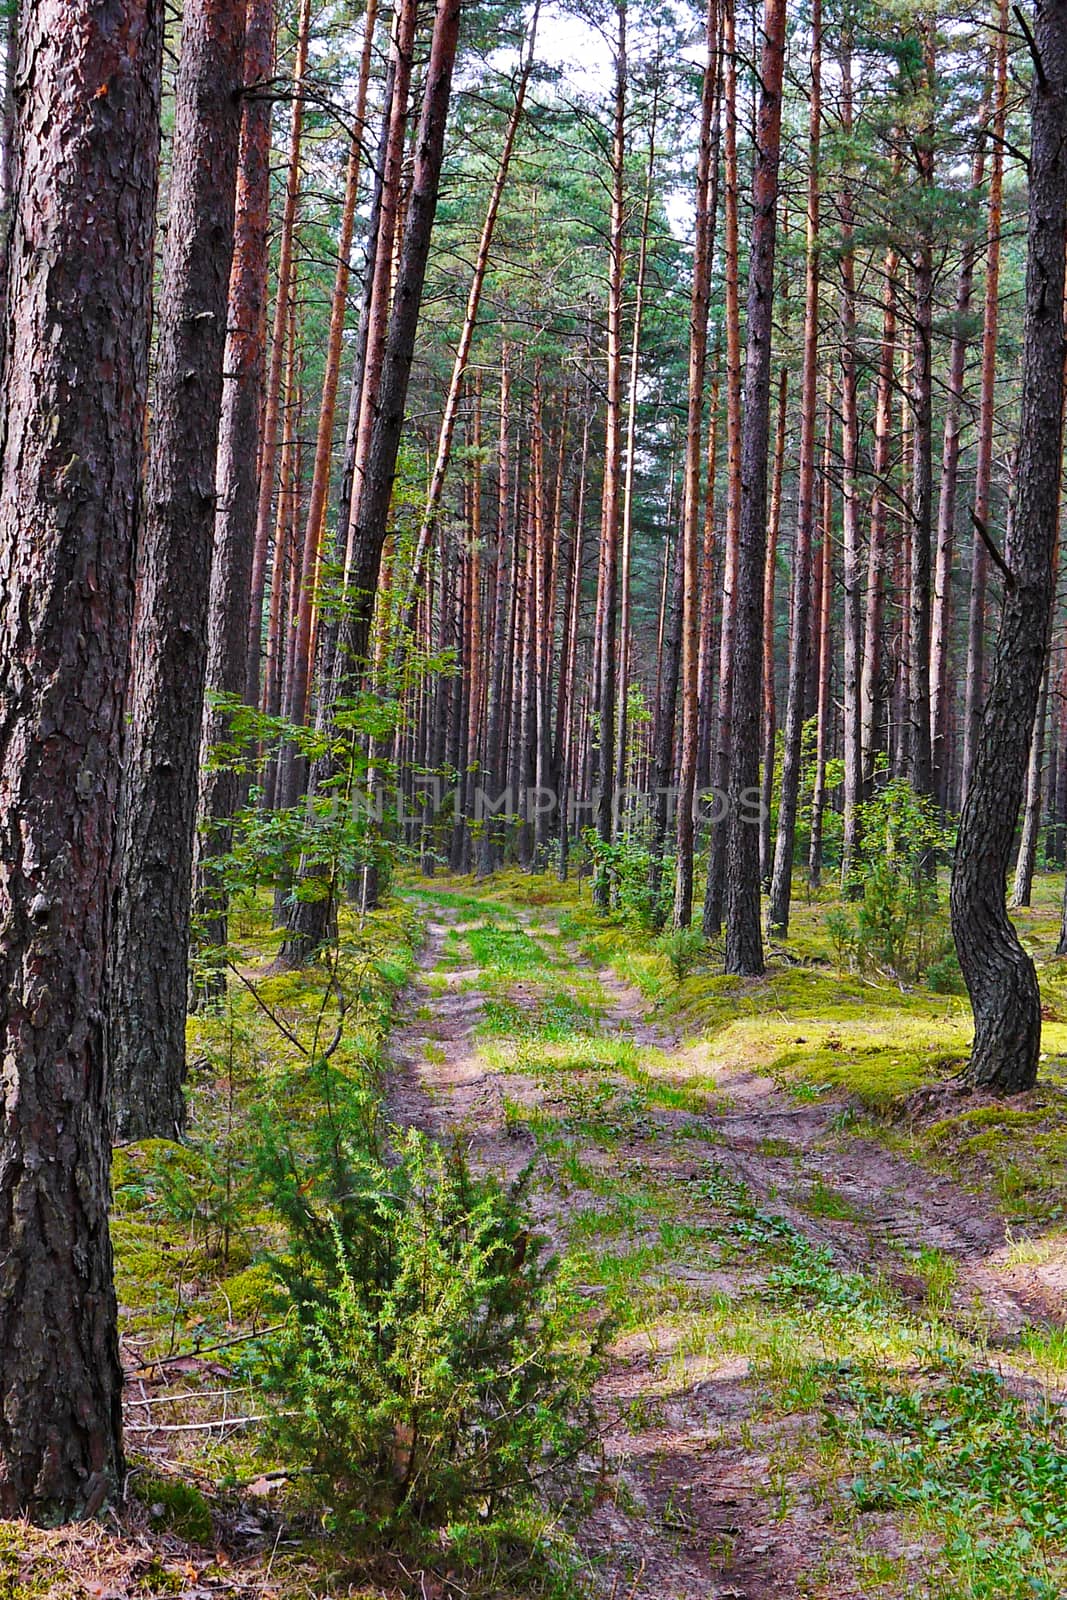 A path in a pine forest. Slender trees with spines by Adamchuk